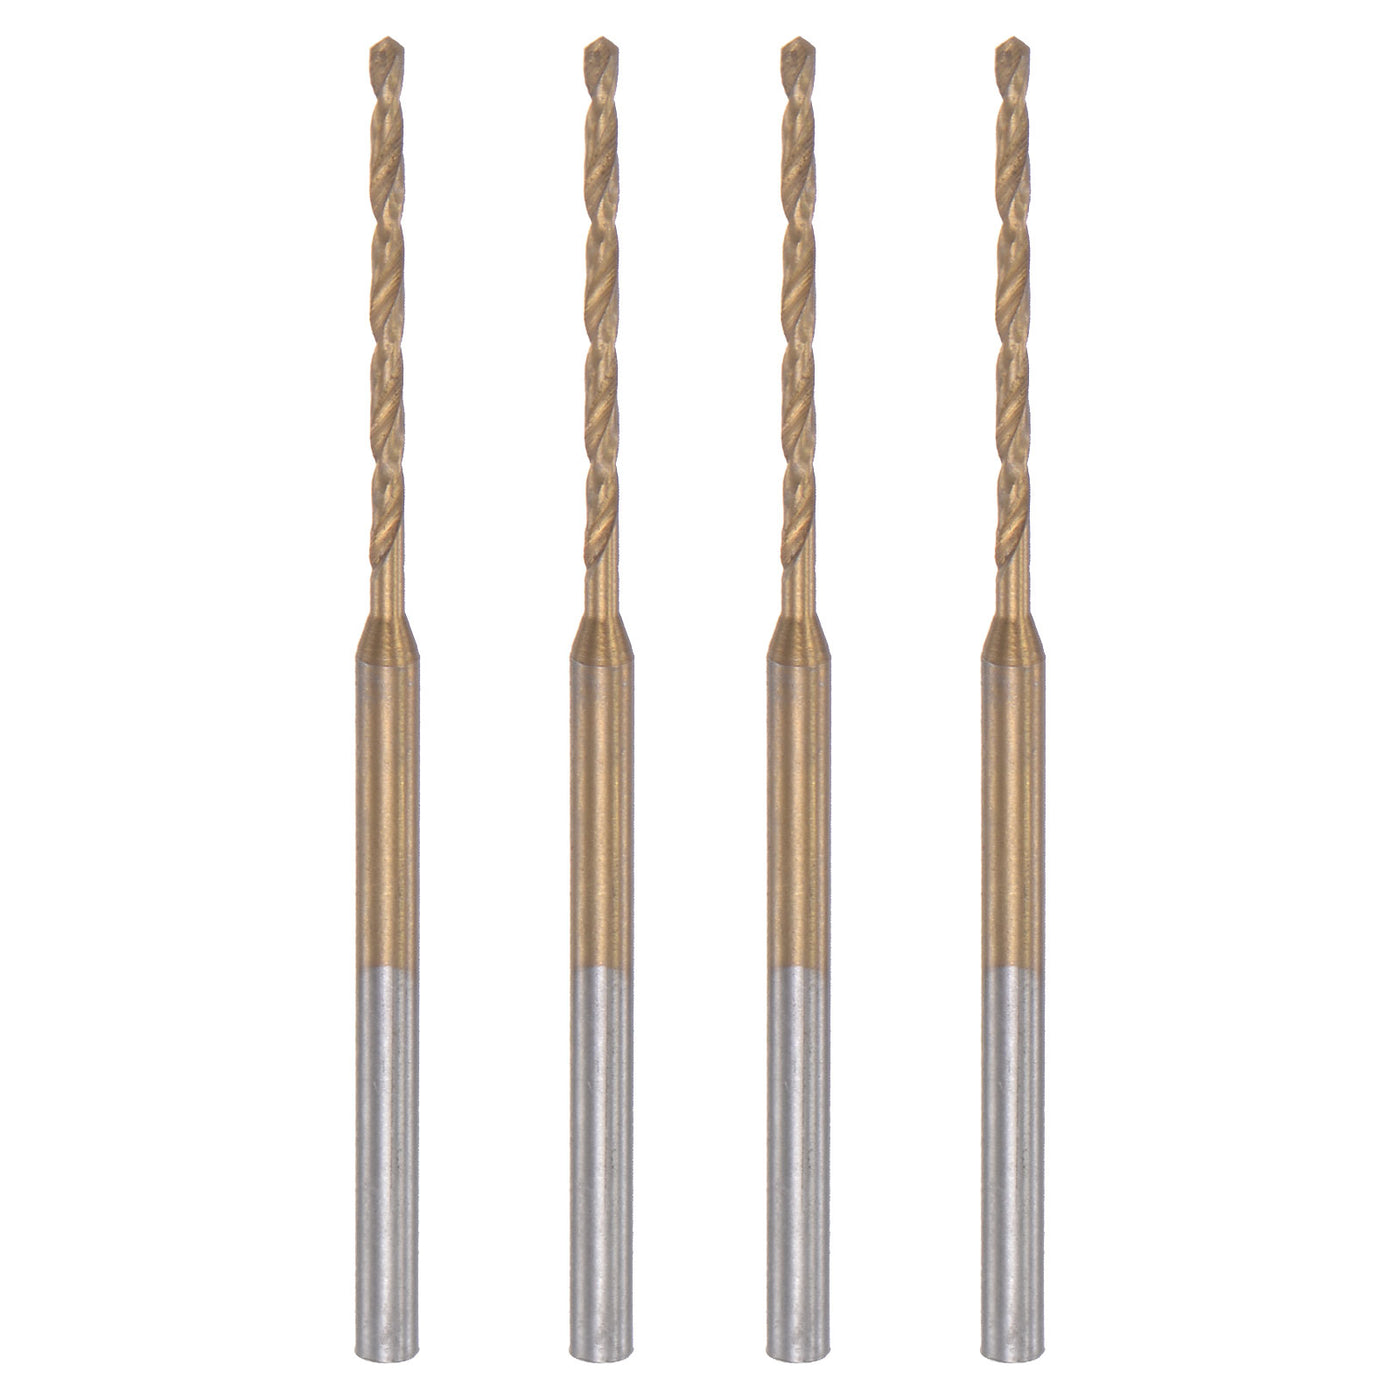 uxcell Uxcell Micro Engraving Drill Bit, High-Speed Steel Titanium Coated